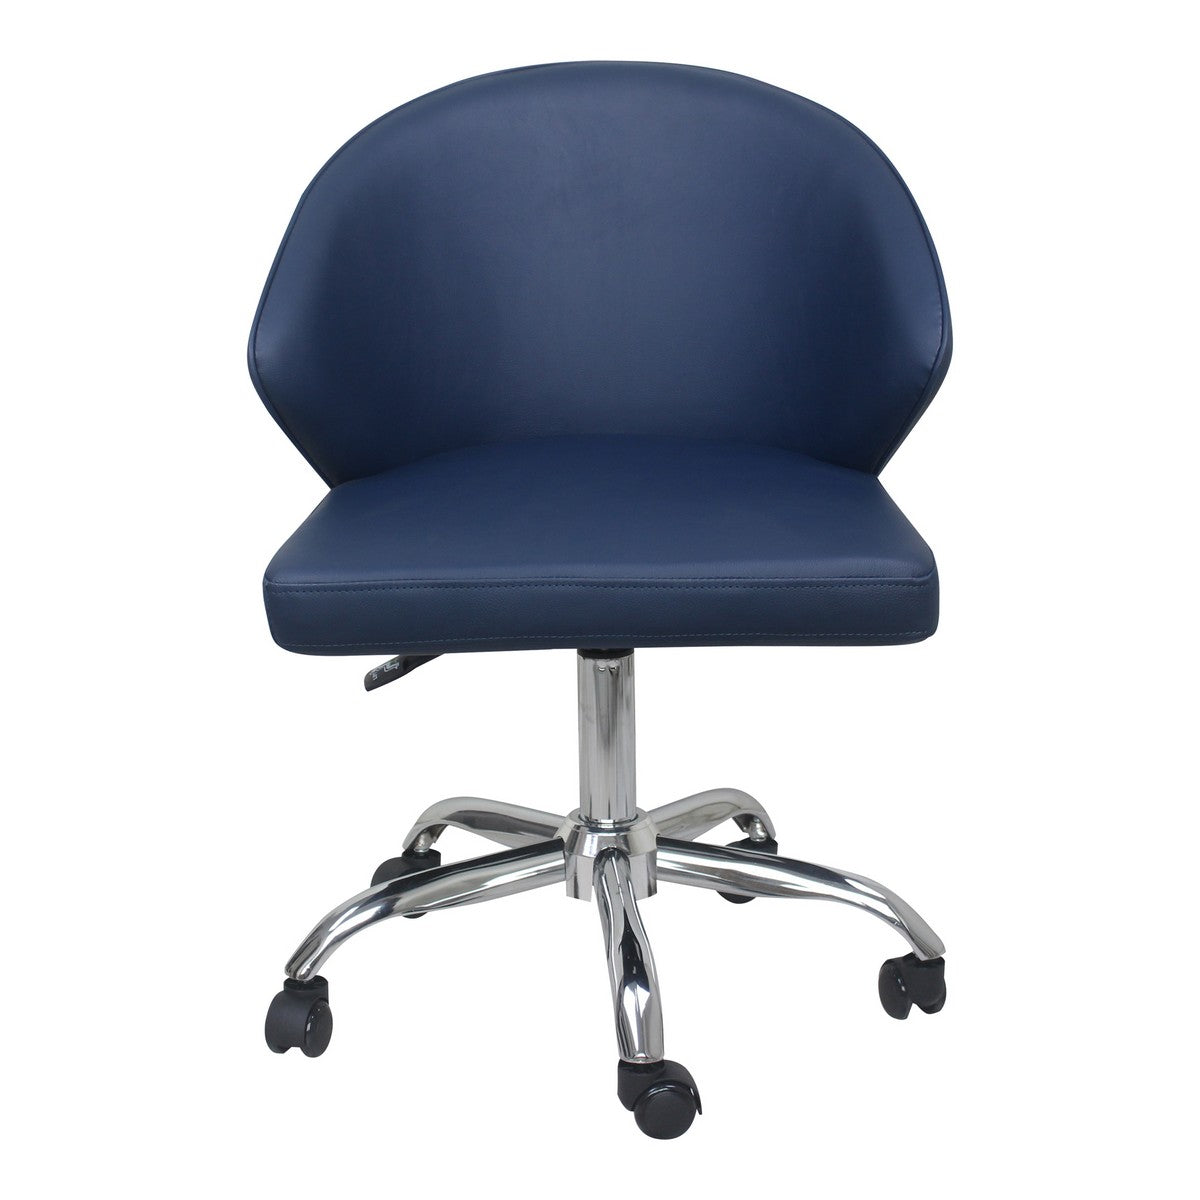 Moe's Home Collection Albus Swivel office Chair Blue - UU-1015-19 - Moe's Home Collection - Office Chairs - Minimal And Modern - 1